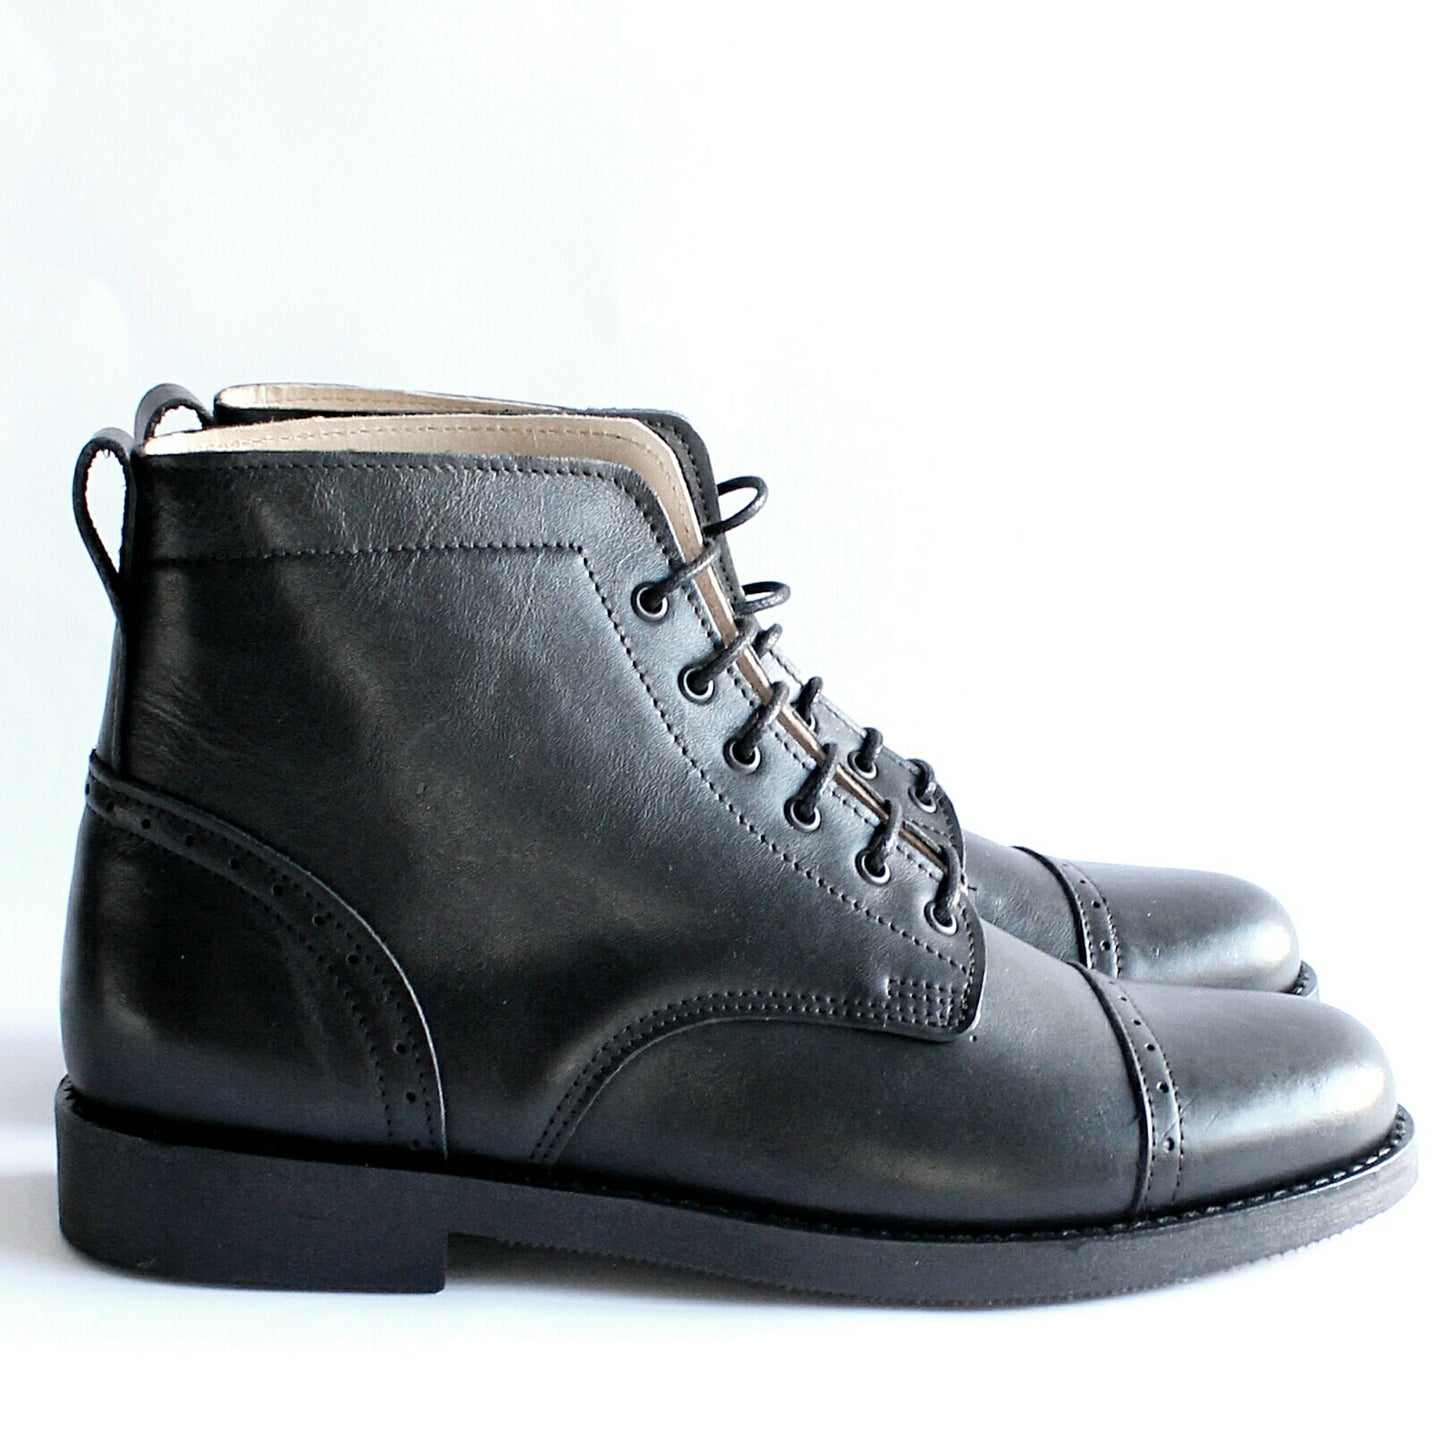 Tejo Black Boots - OldMulla - Boots Store, Handmade By George